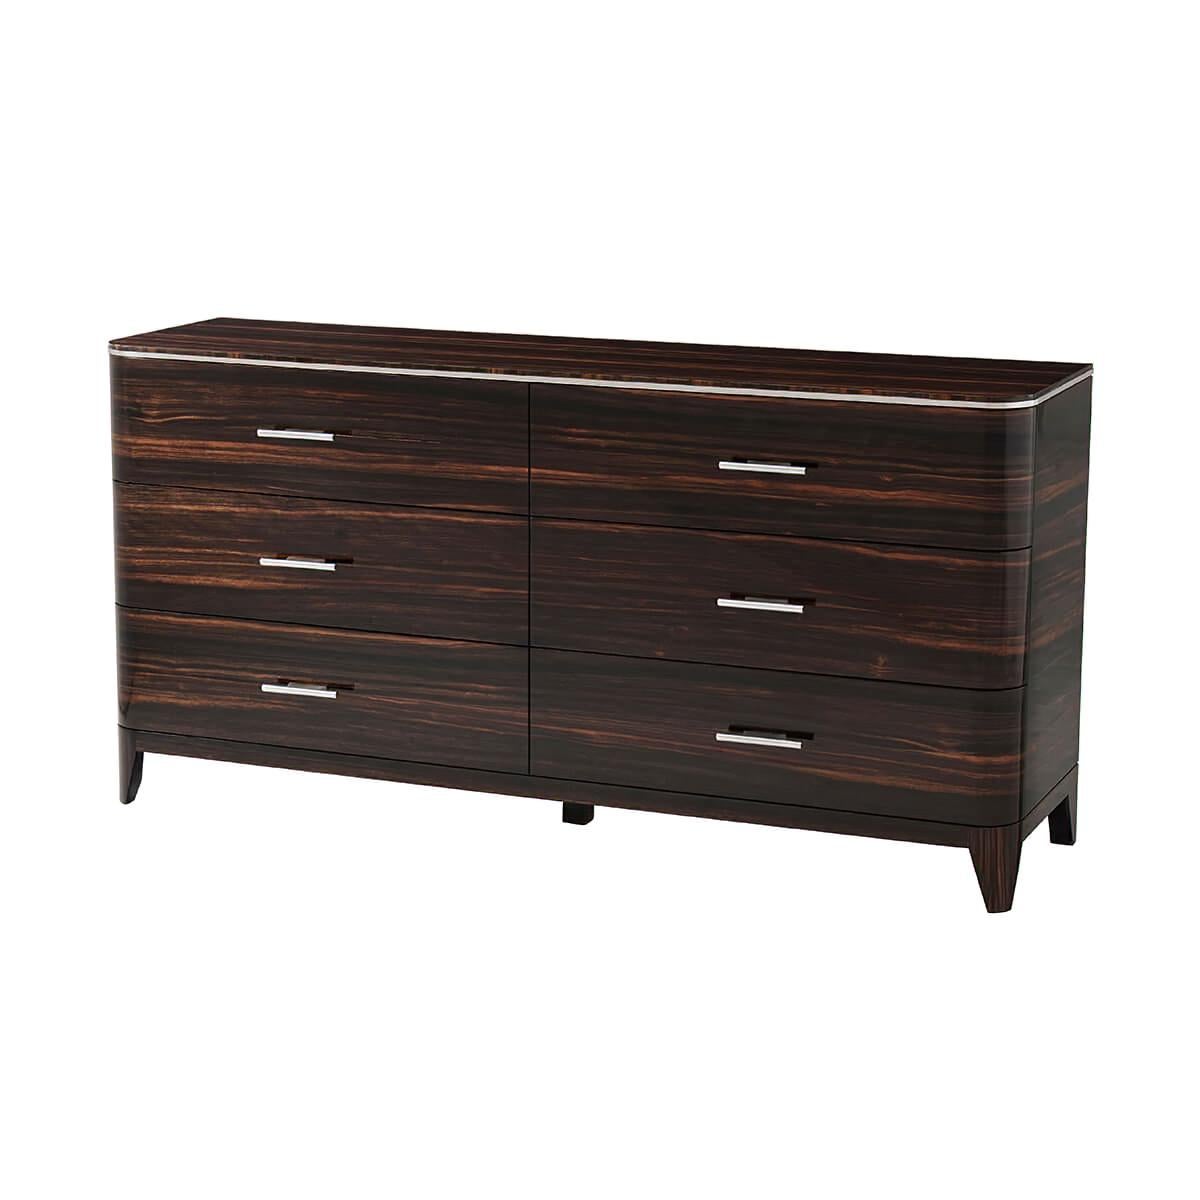 An Art Deco style dresser inspired by 1930s luxury. This six drawer dresser with a rounded edge top with polished nickel trim, exotic Amara veneers with polished nickel finish handles, on tapering legs, with soft closing drawers.

Dimensions: 70